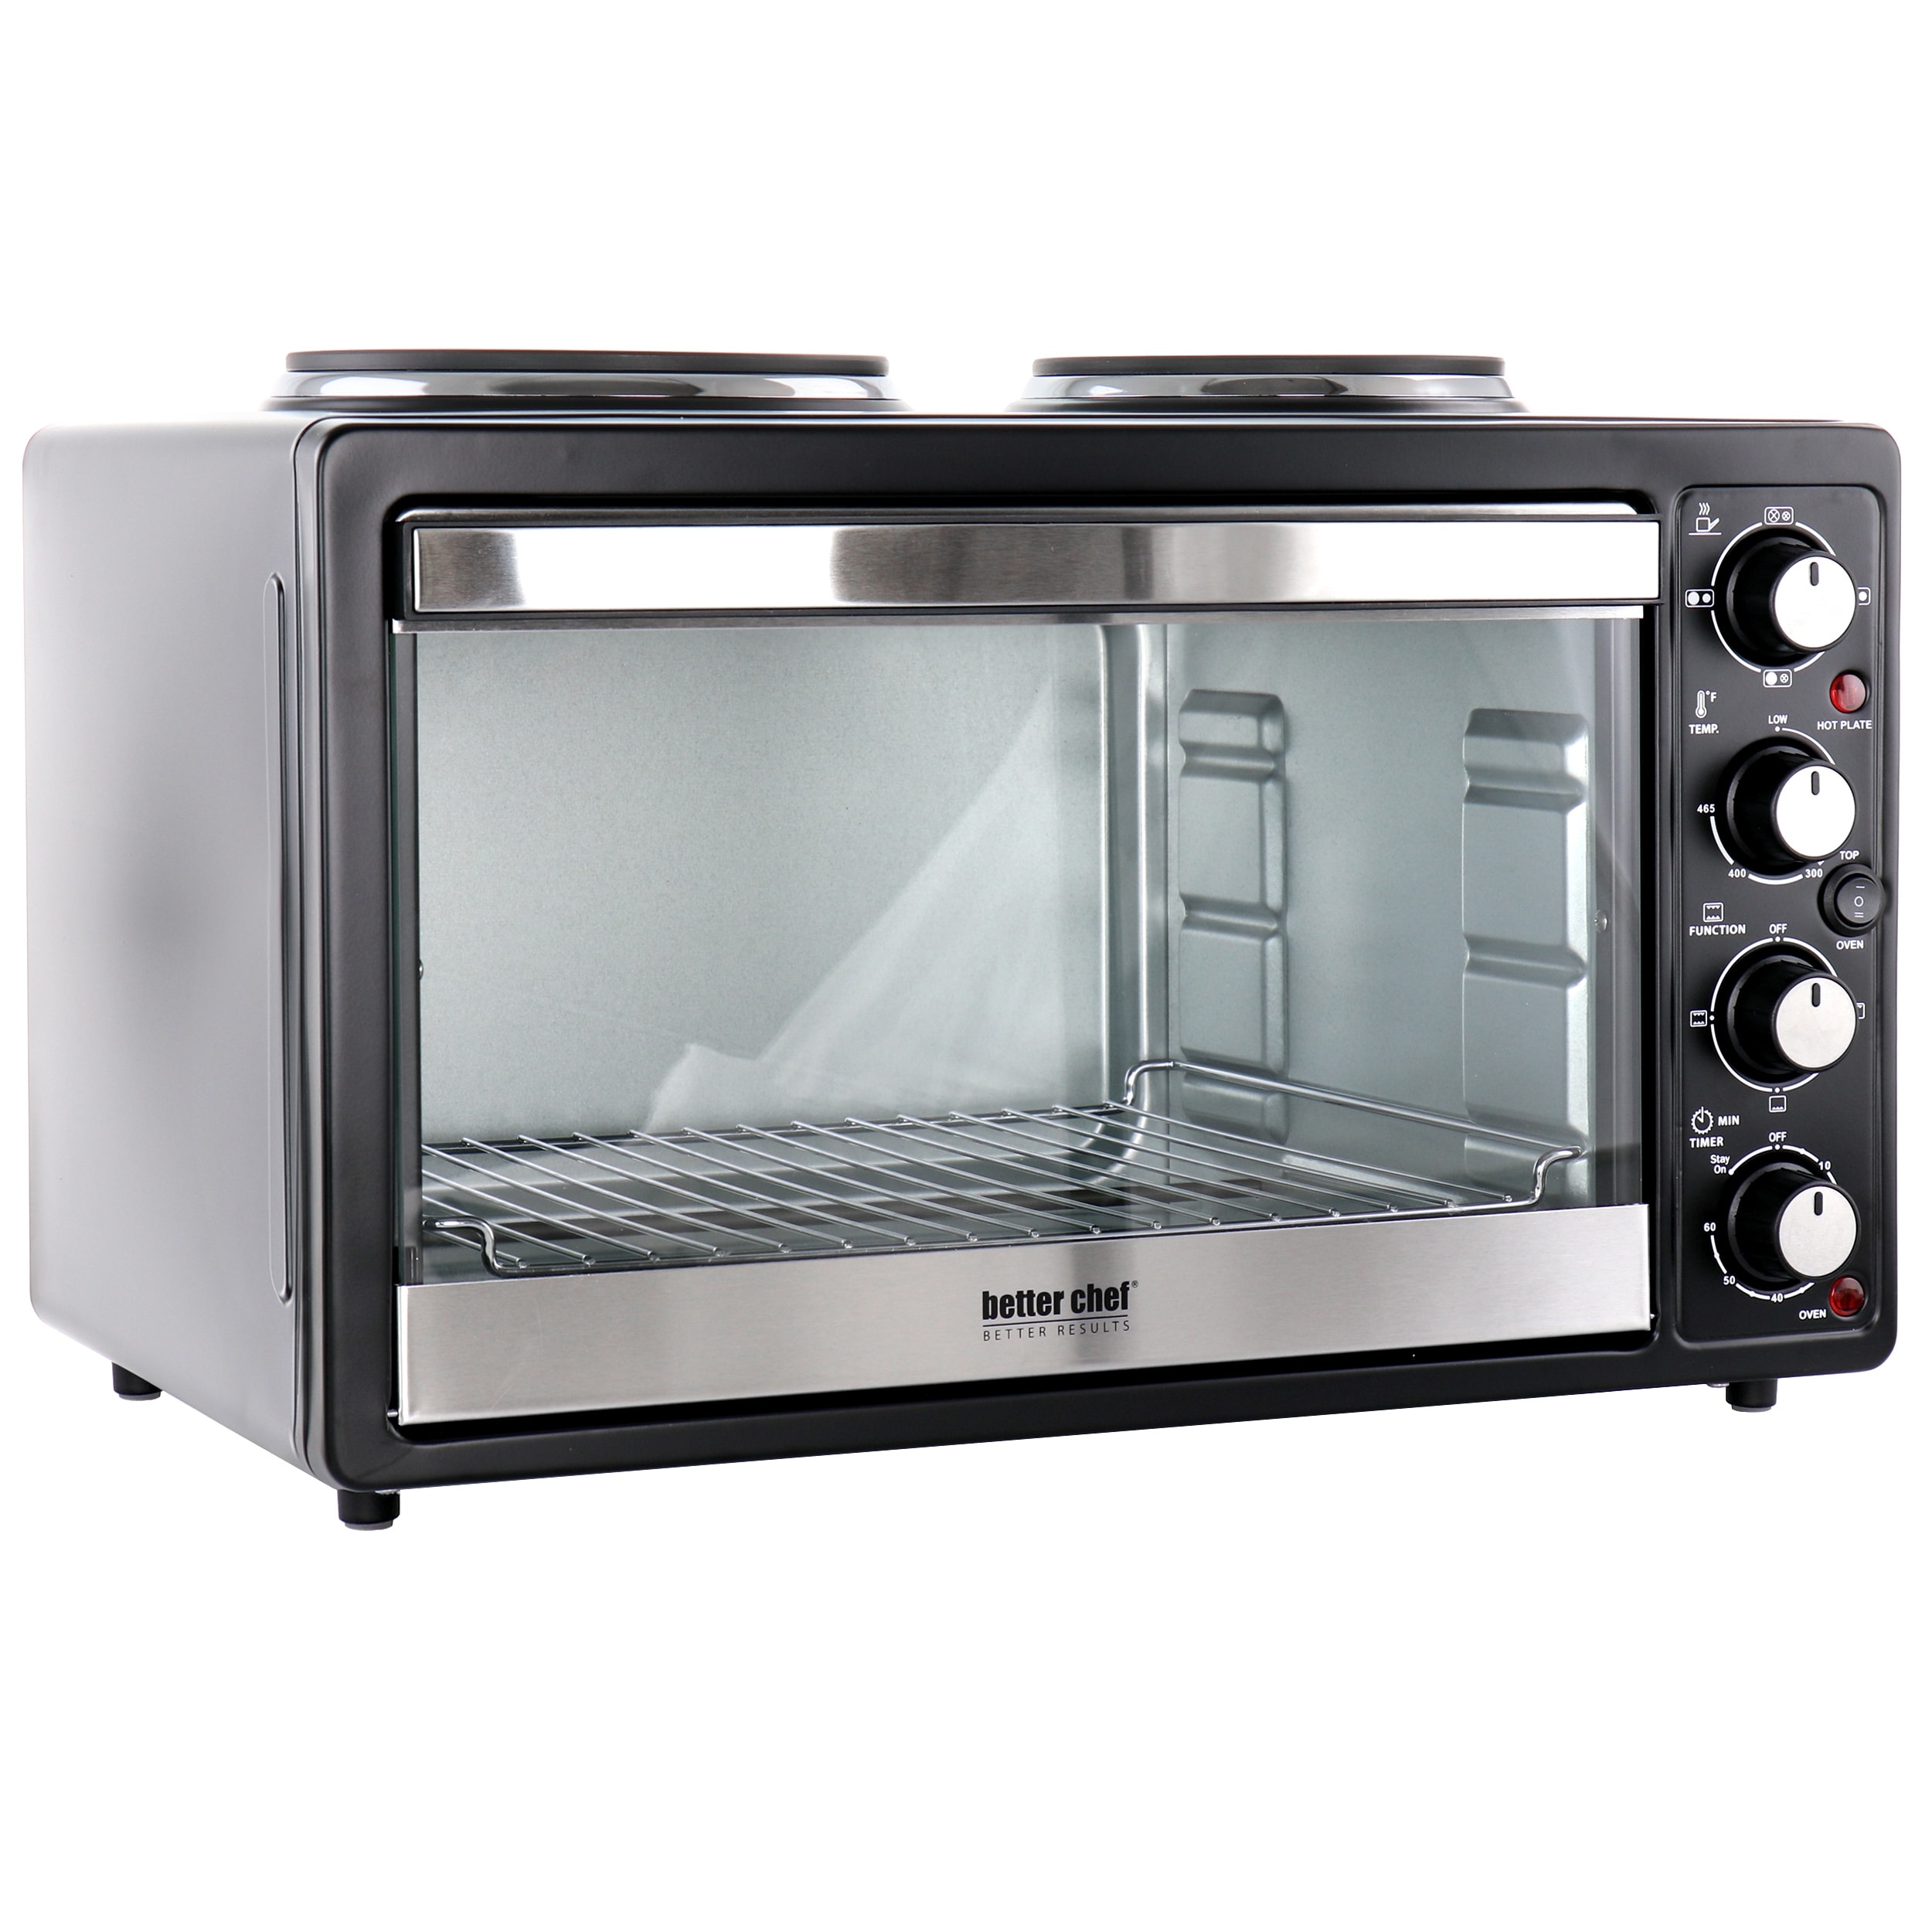 6 slice Oster Countertop Oven XL with Convection, Stainless Steel 